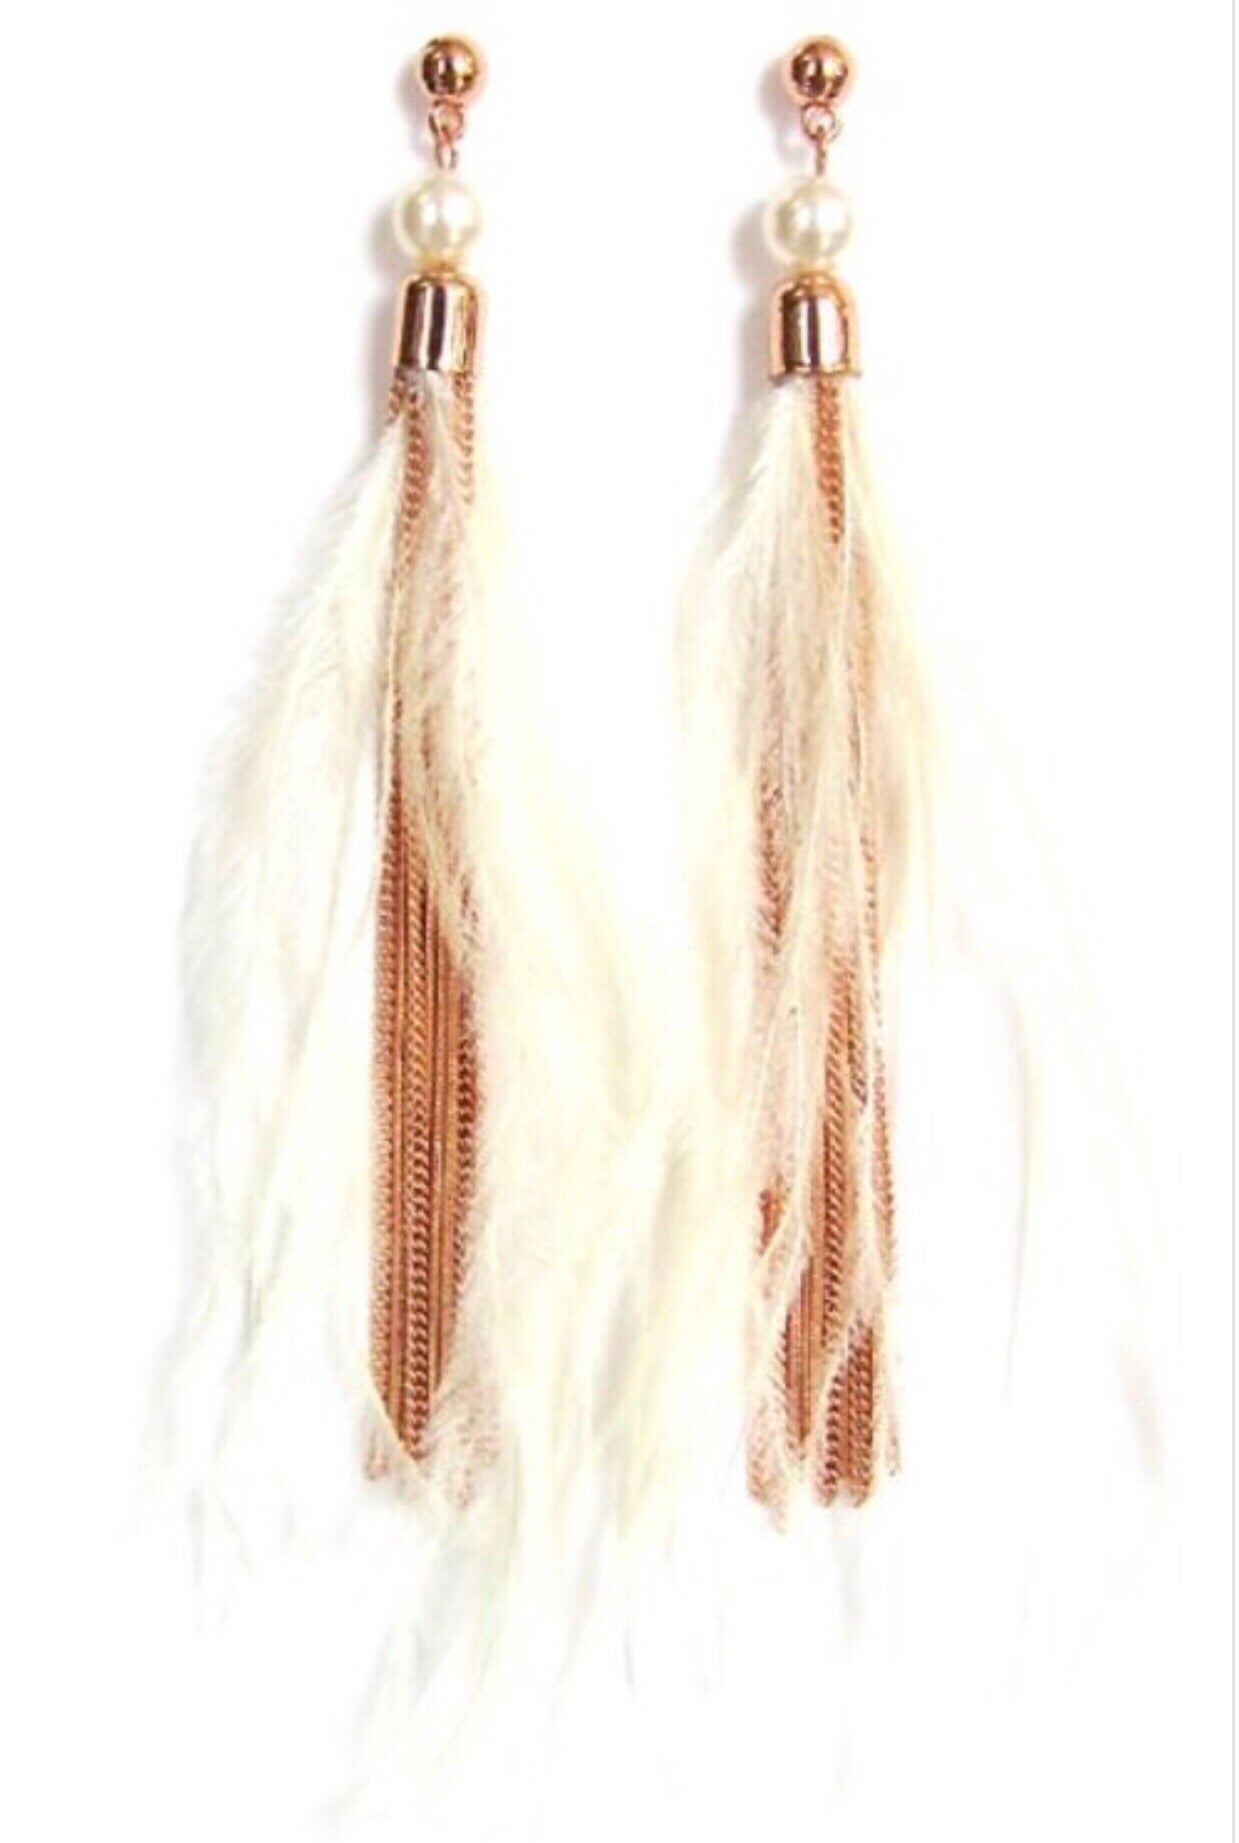 Feather & Metal Tassel Drop Earrings - Corinne an Affordable Women's Clothing Boutique in the US USA